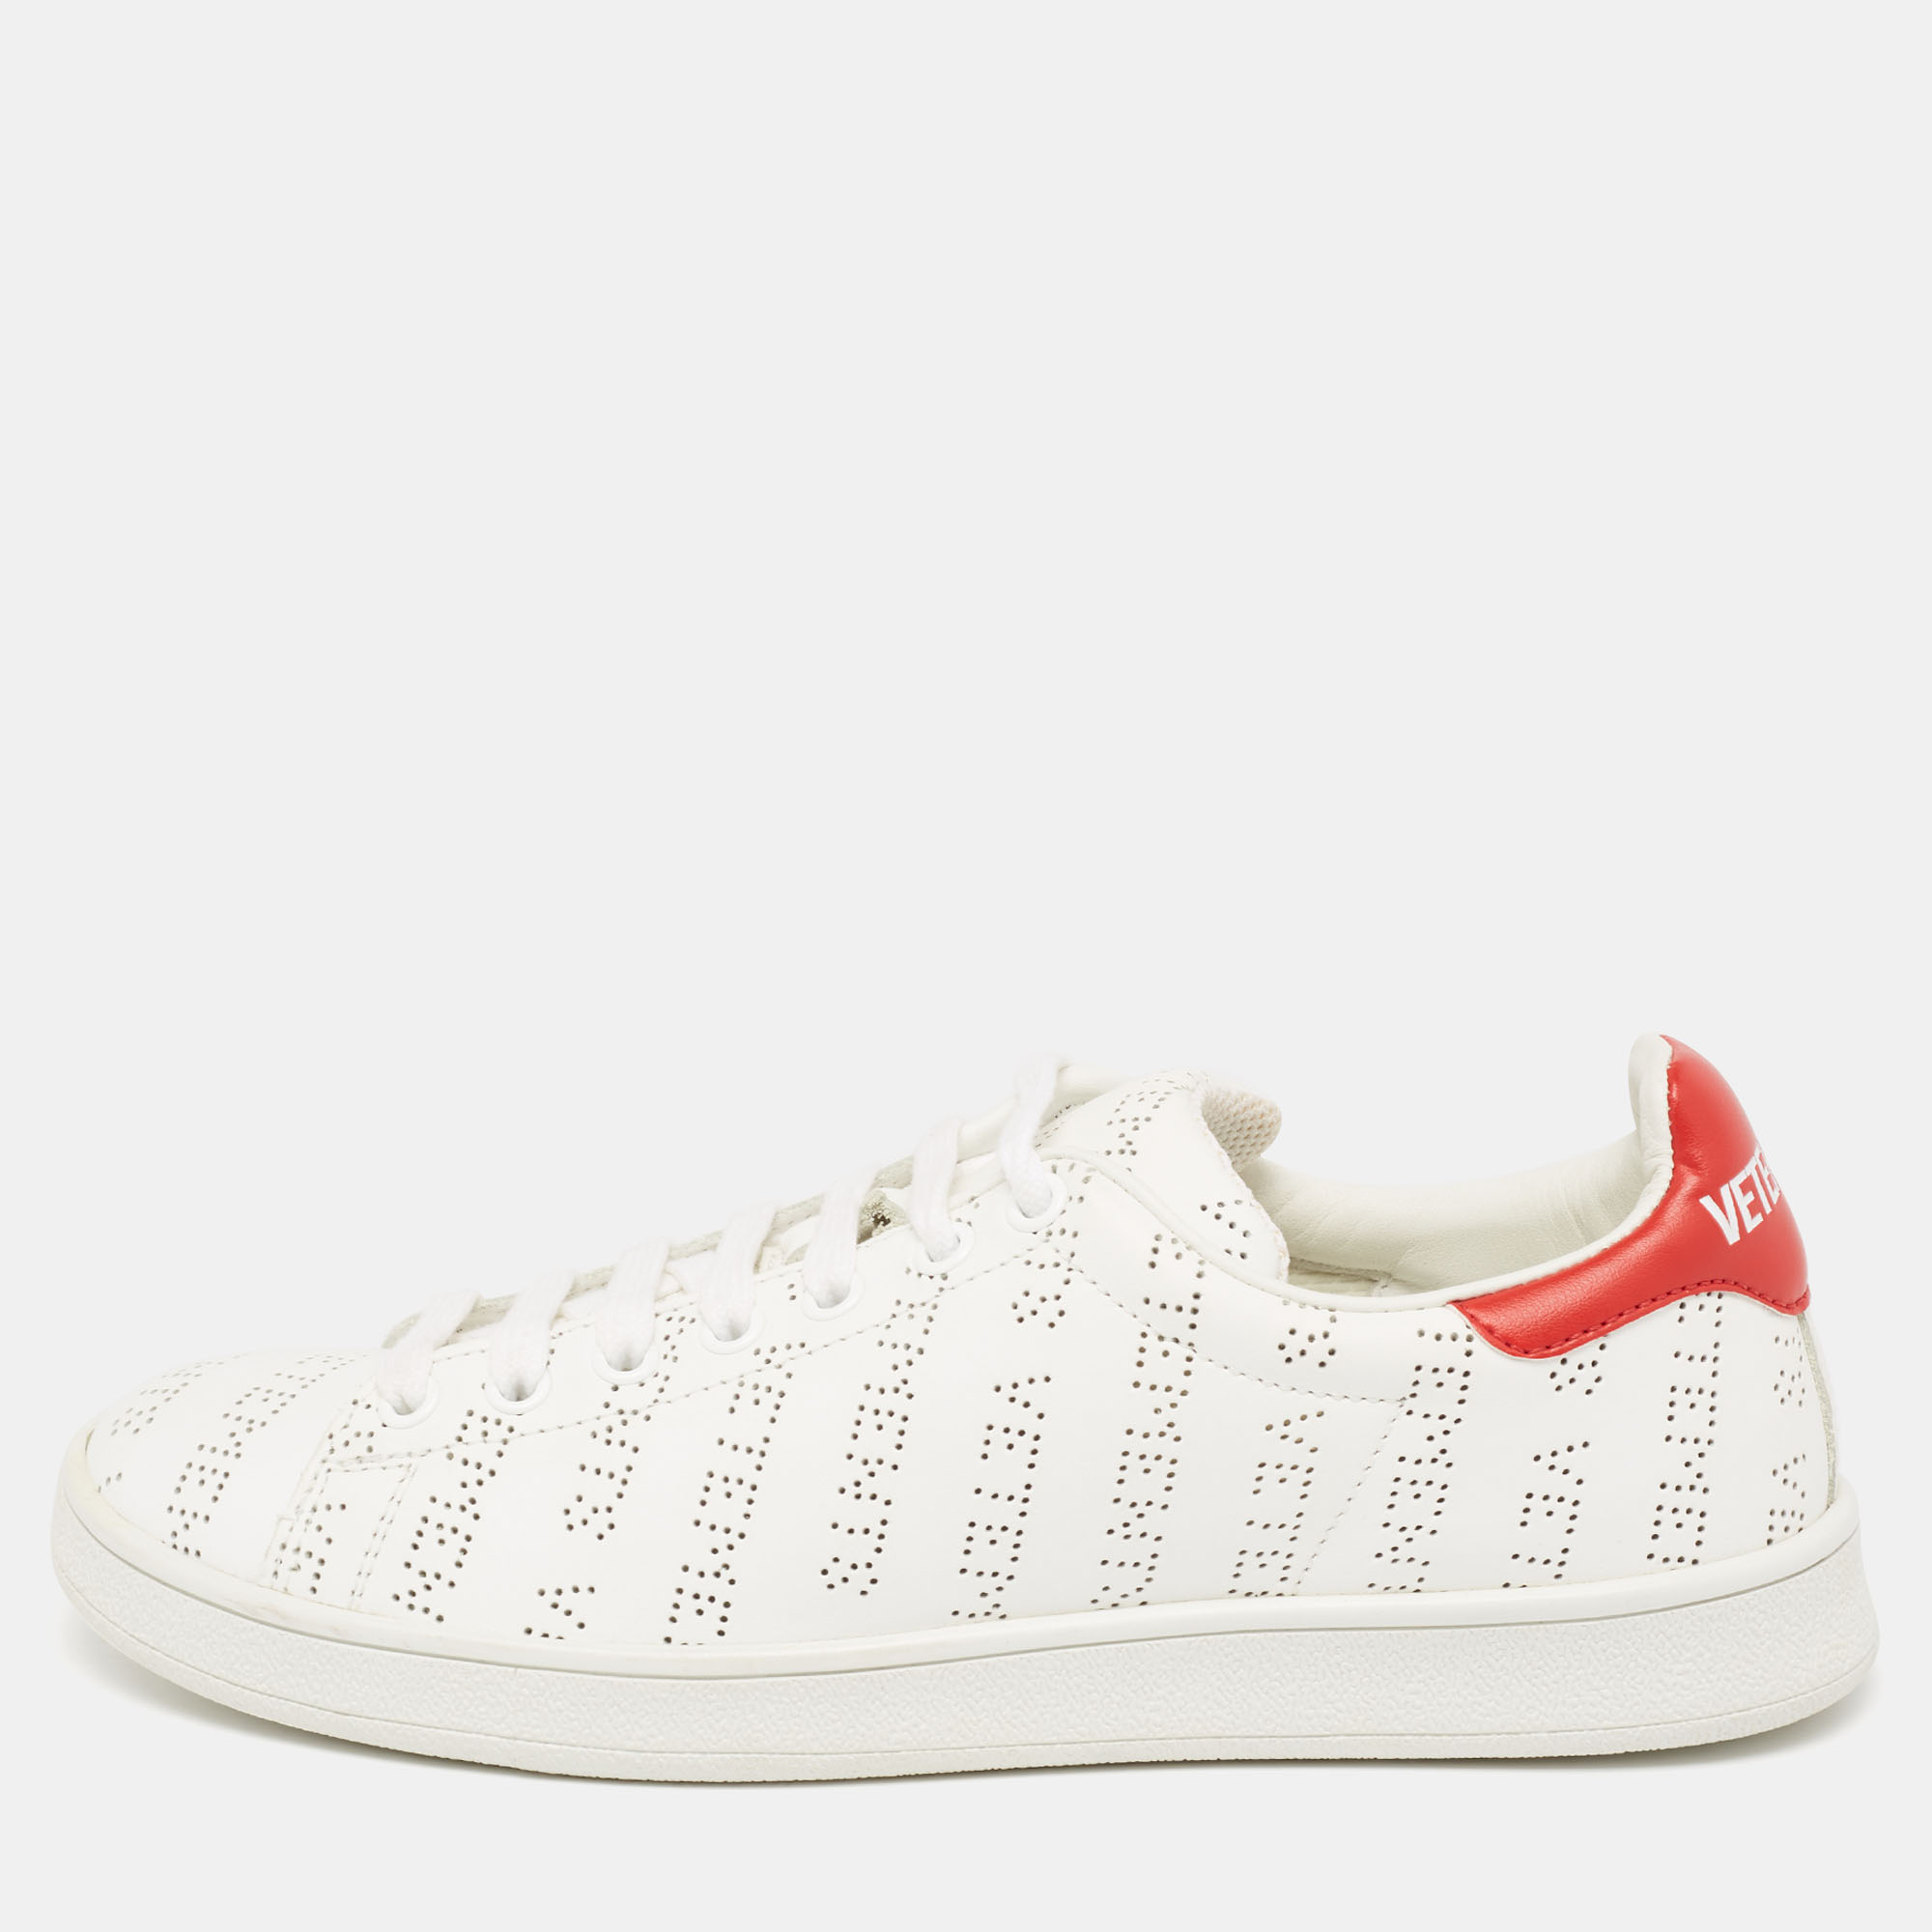 Vetements White/Red Perforated logo Leather Low-Top Sneakers Size 38